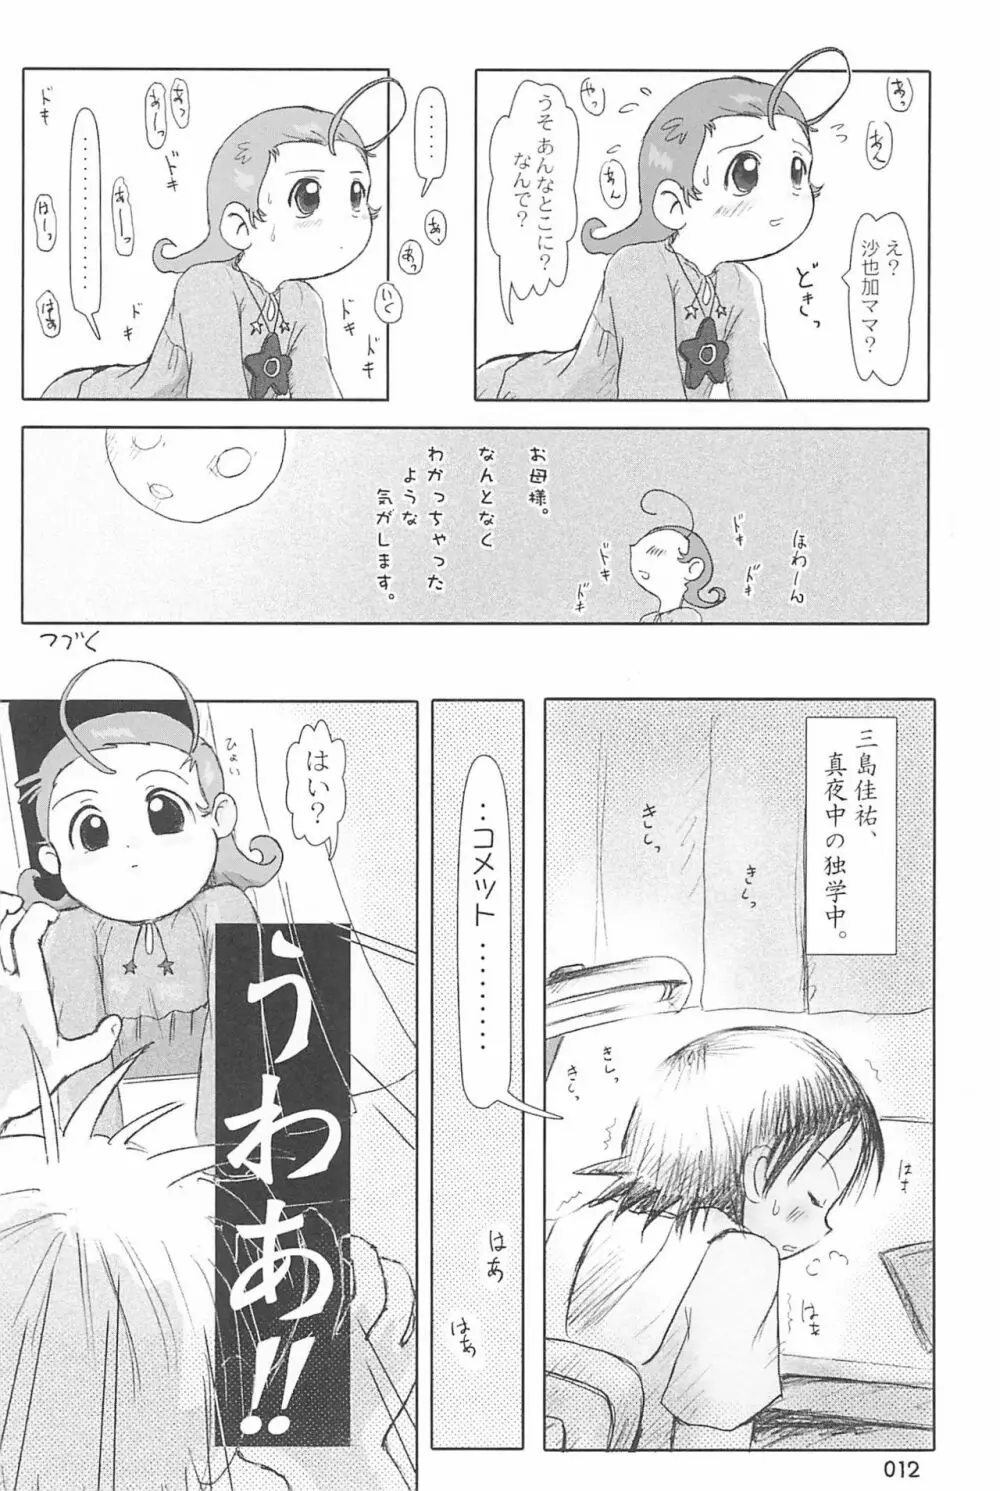 ND-special Volume 4 12ページ